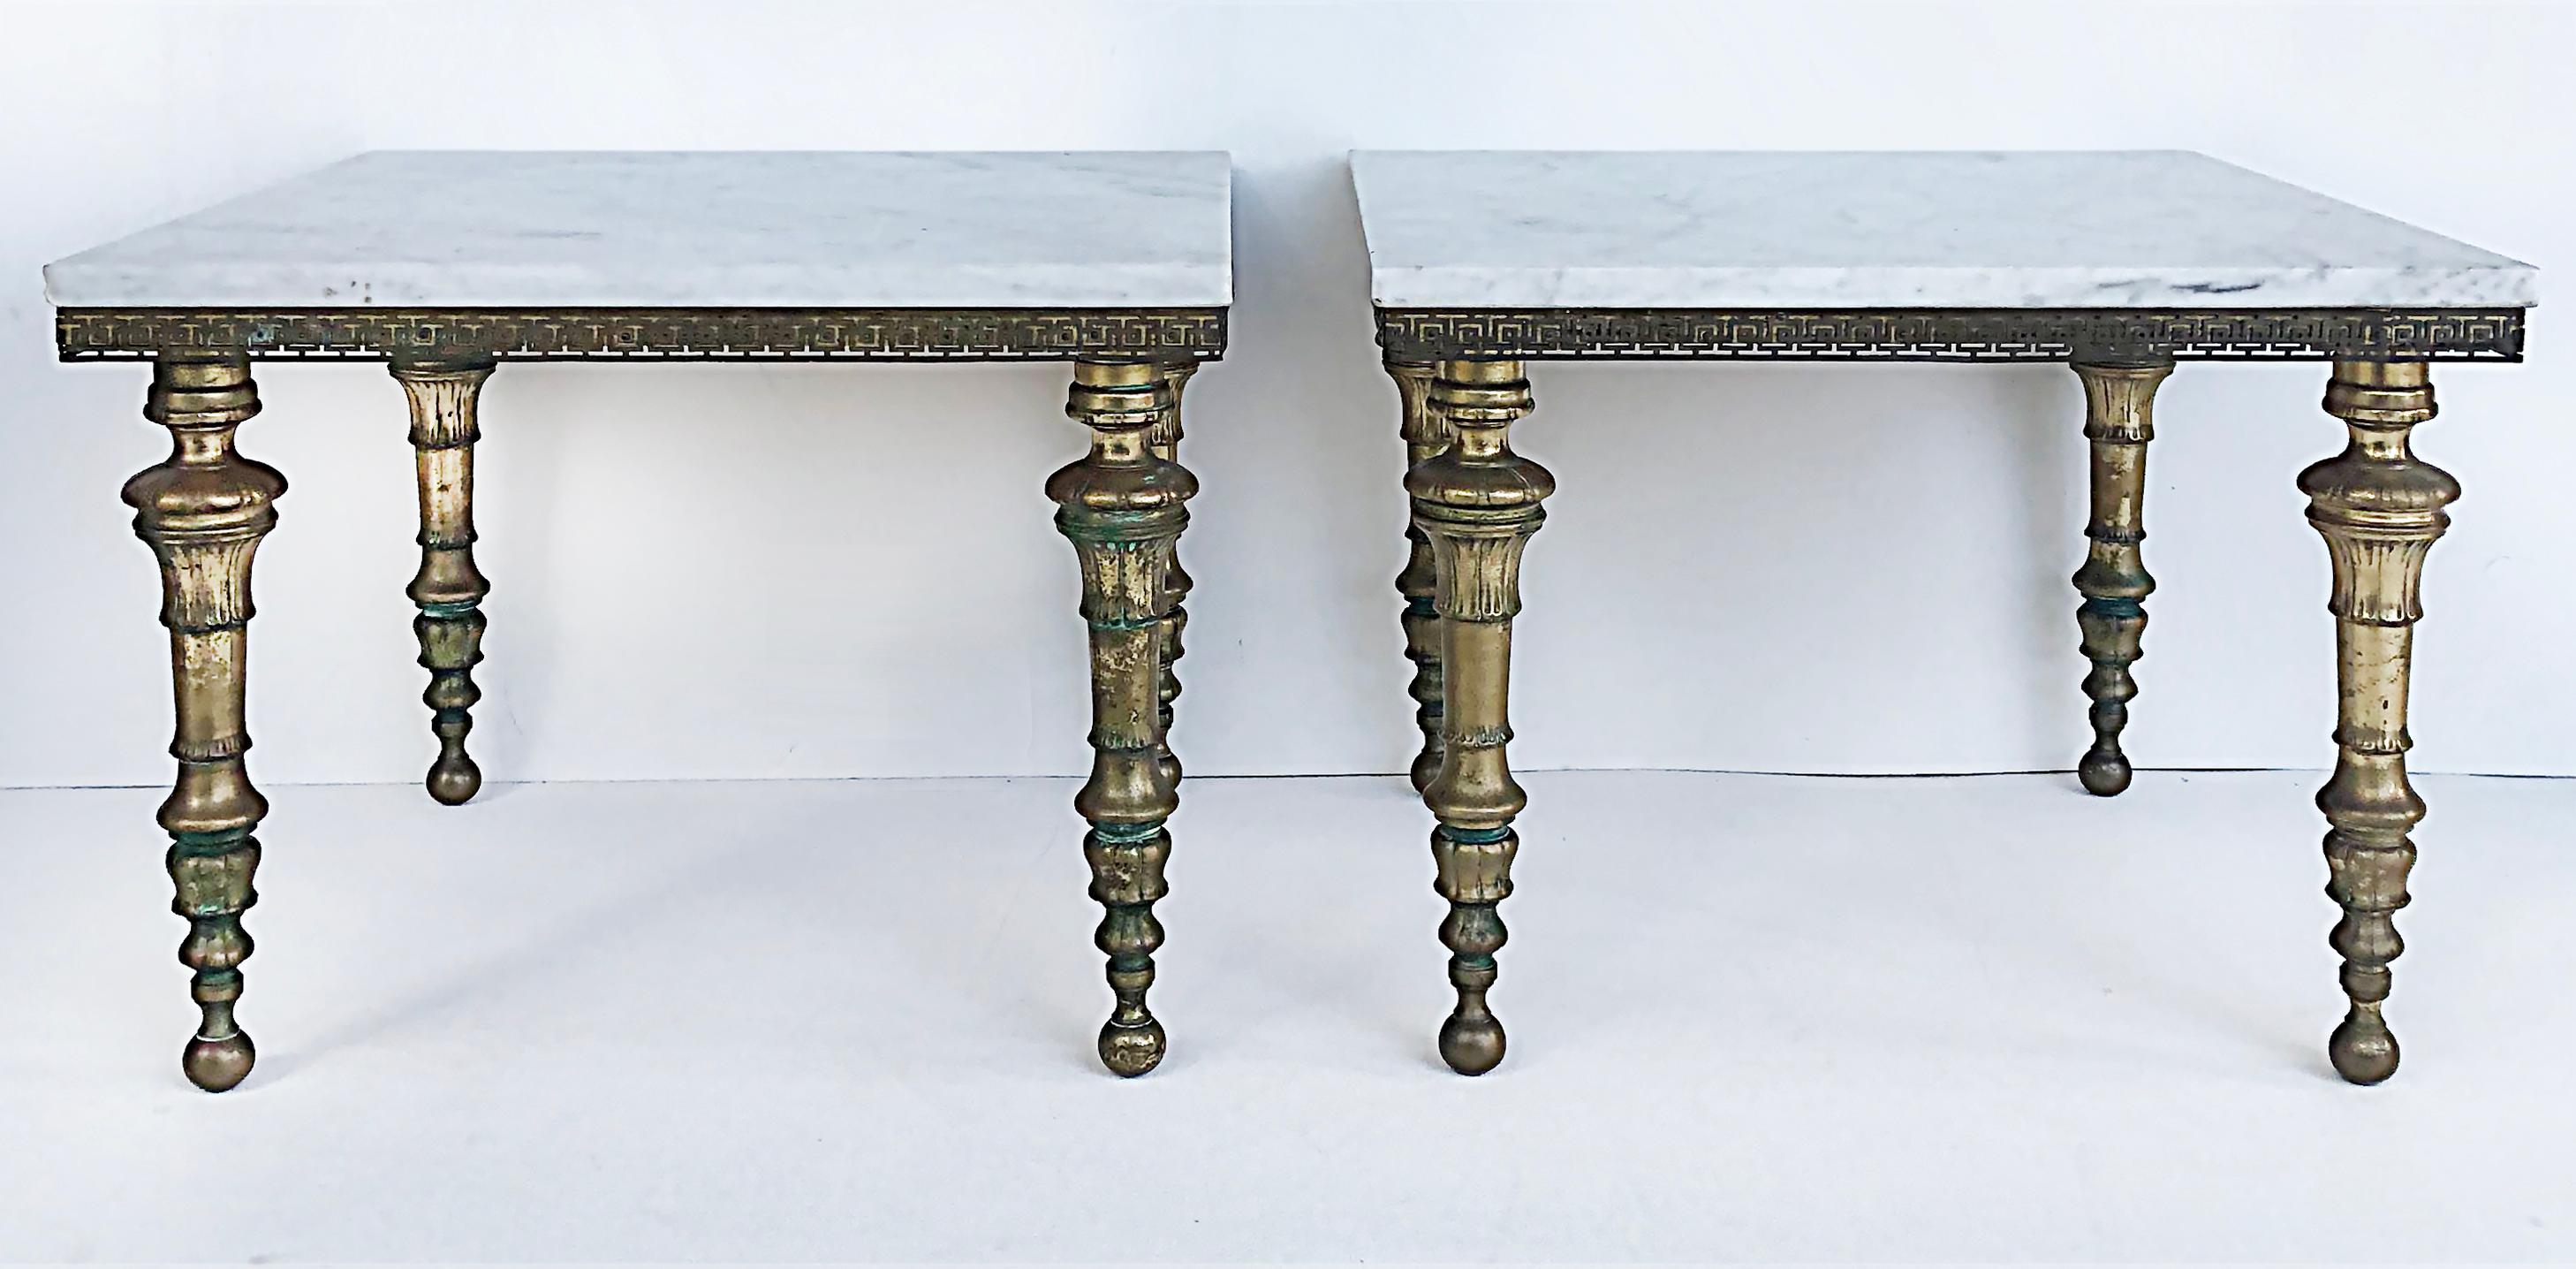 Hollywood Regency Brass and Italian Carrara Marble Tables, Pair

Offered for sale is a pair of ornate 1950s brass and white Carrera marble-topped low tables. The sides of the tables are edged with Greek Key trim and the undersides of the marble are